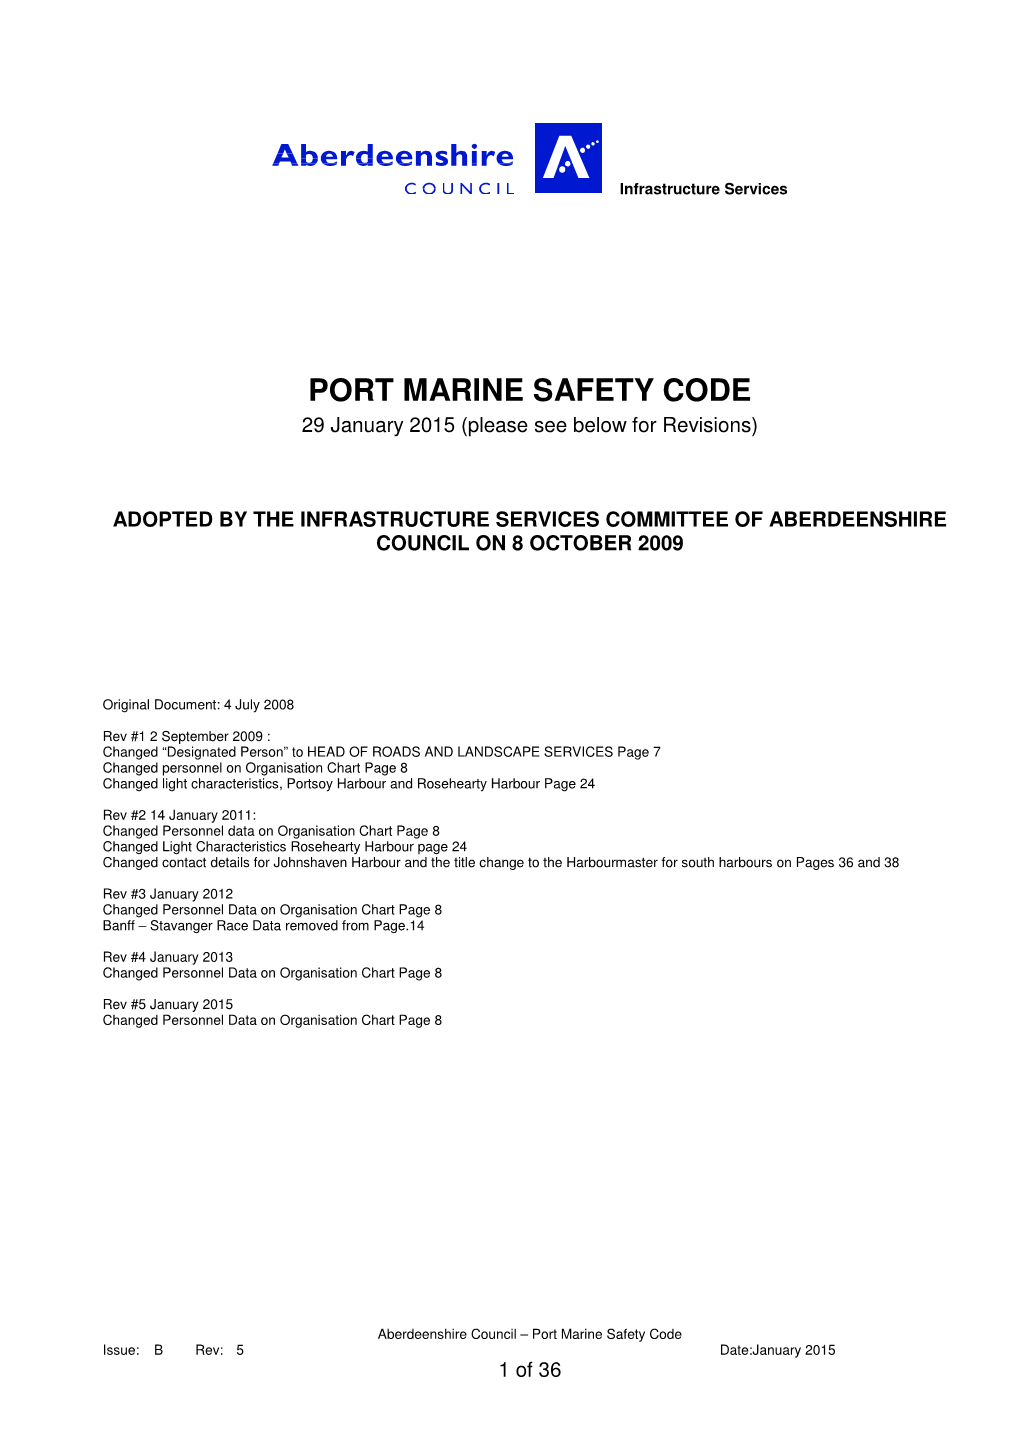 PORT MARINE SAFETY CODE 29 January 2015 (Please See Below for Revisions)